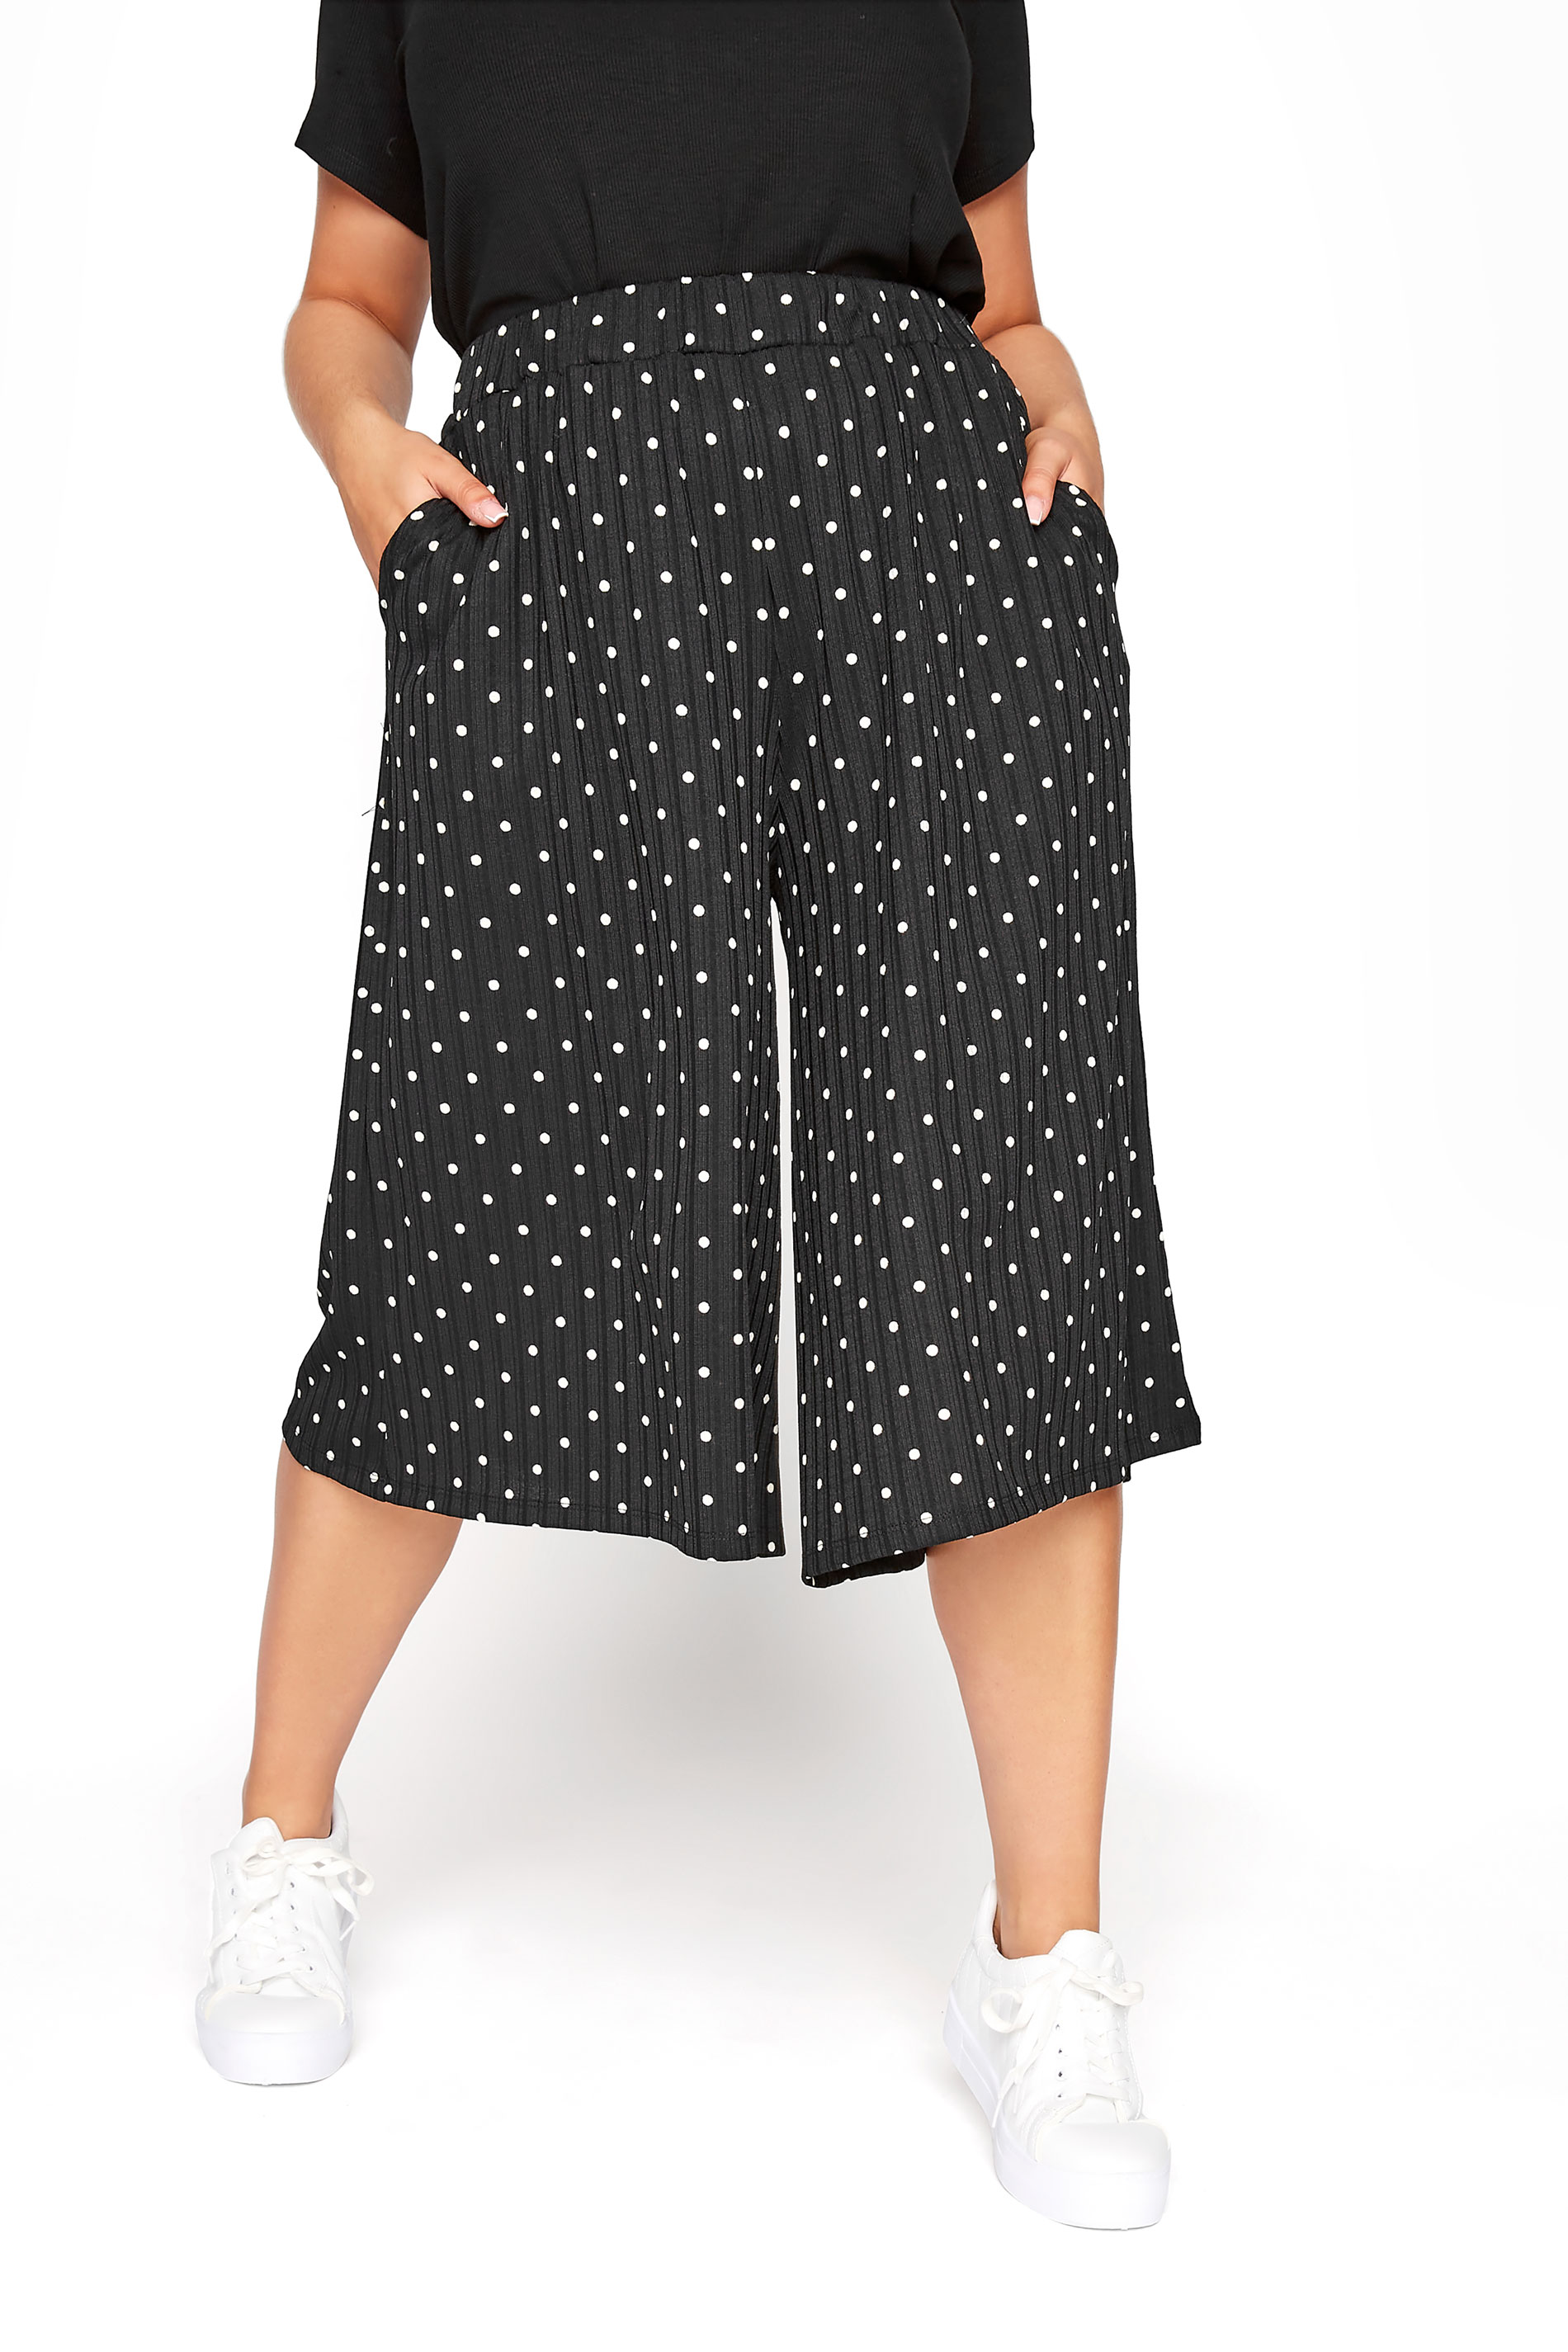 Plus Size Black Polka Dot Print Culottes | Yours Clothing